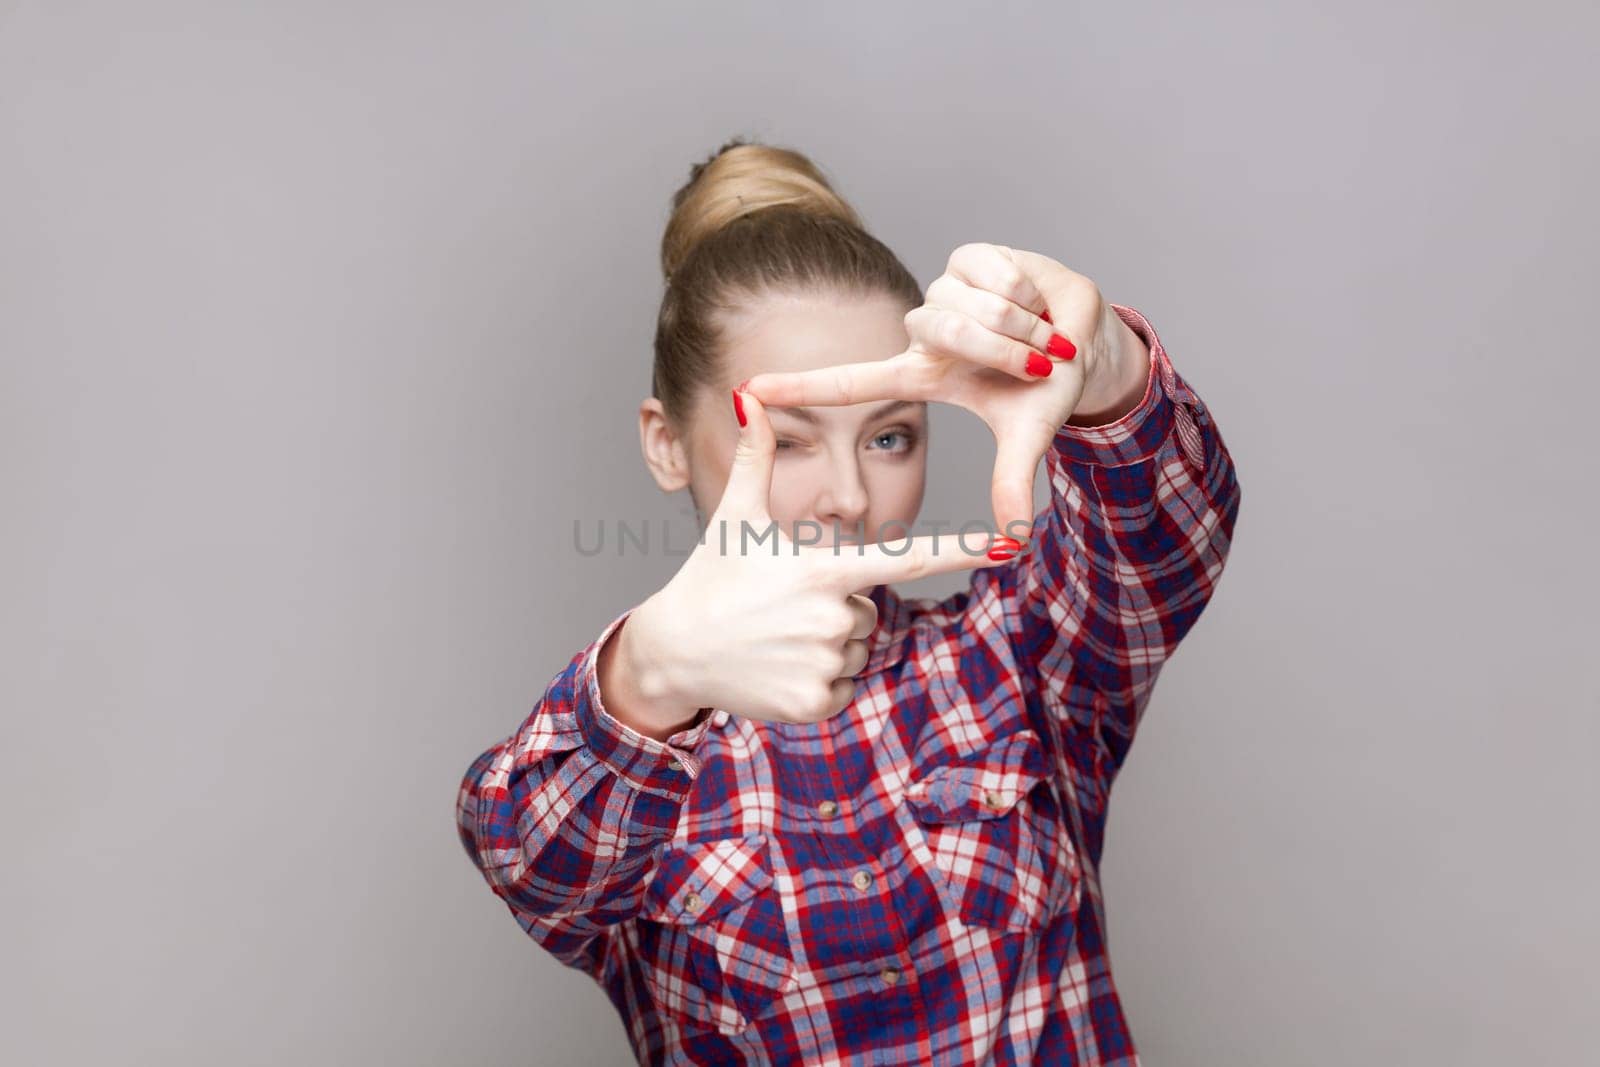 Portrait of attentive concentrated woman photographer with bun hairstyle looking at camera through frame of fingers, wearing checkered shirt. Indoor studio shot isolated on gray background.